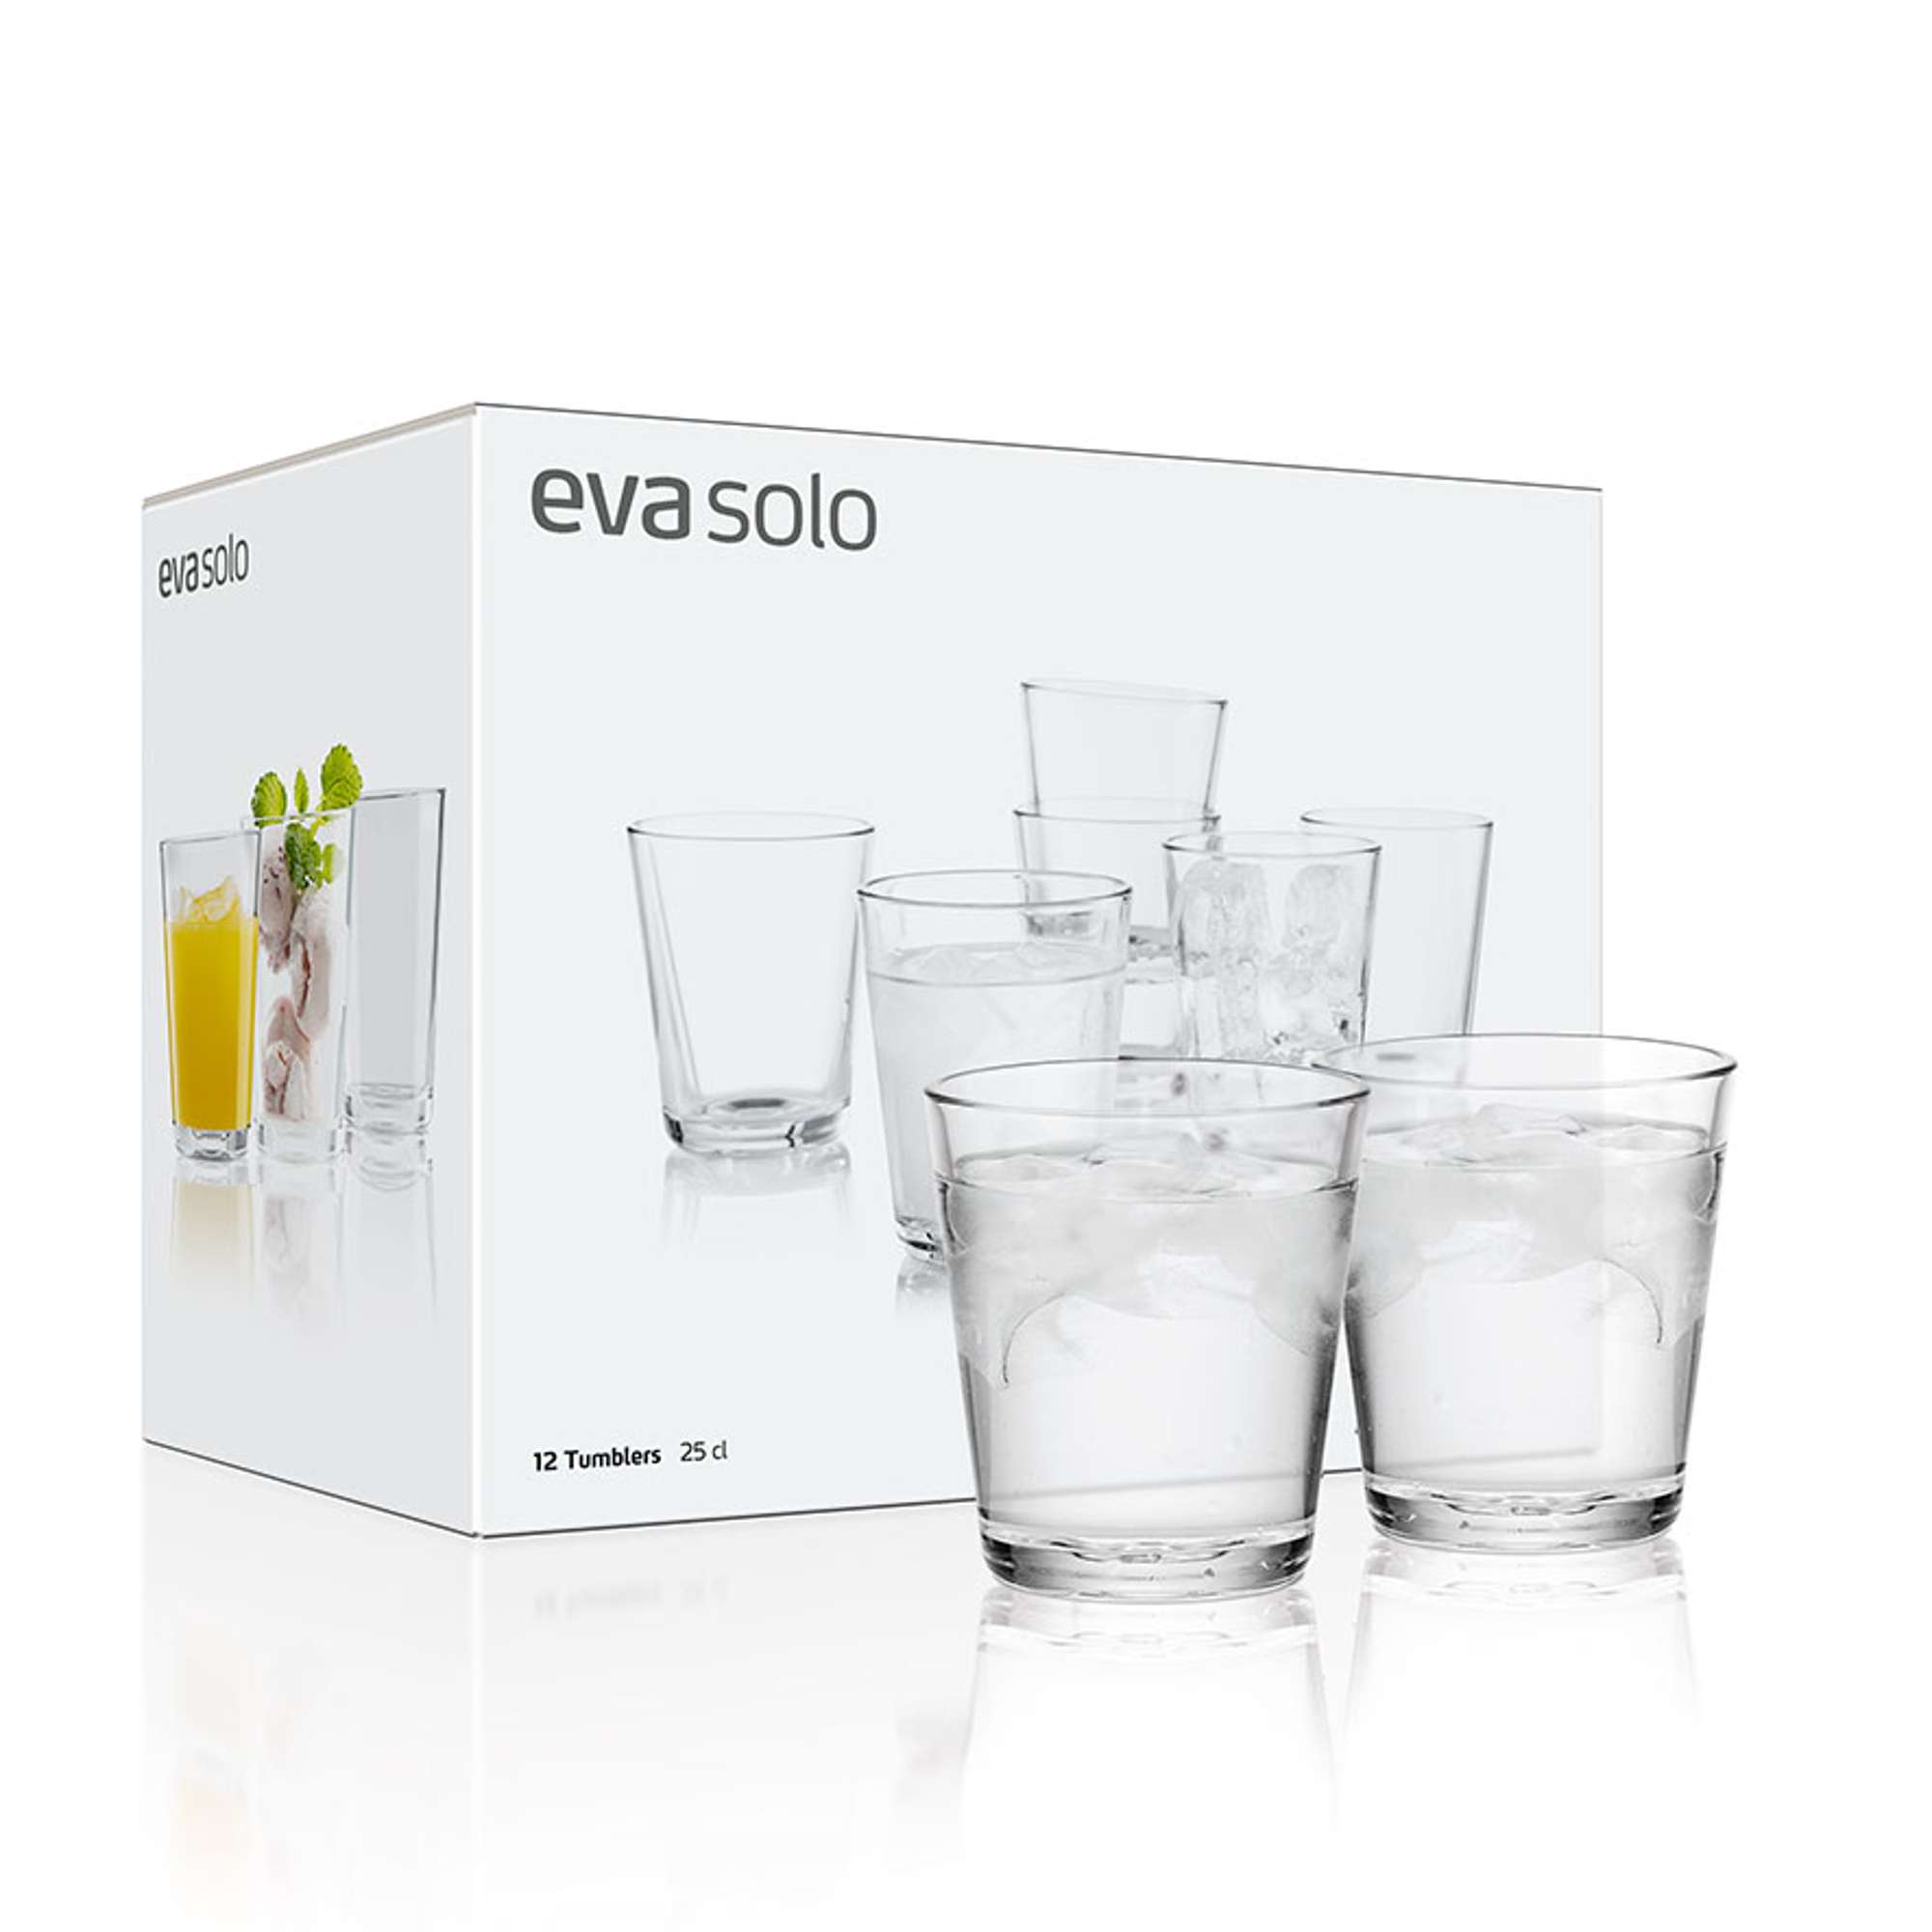 Tumblers 25 - - 12 cl.